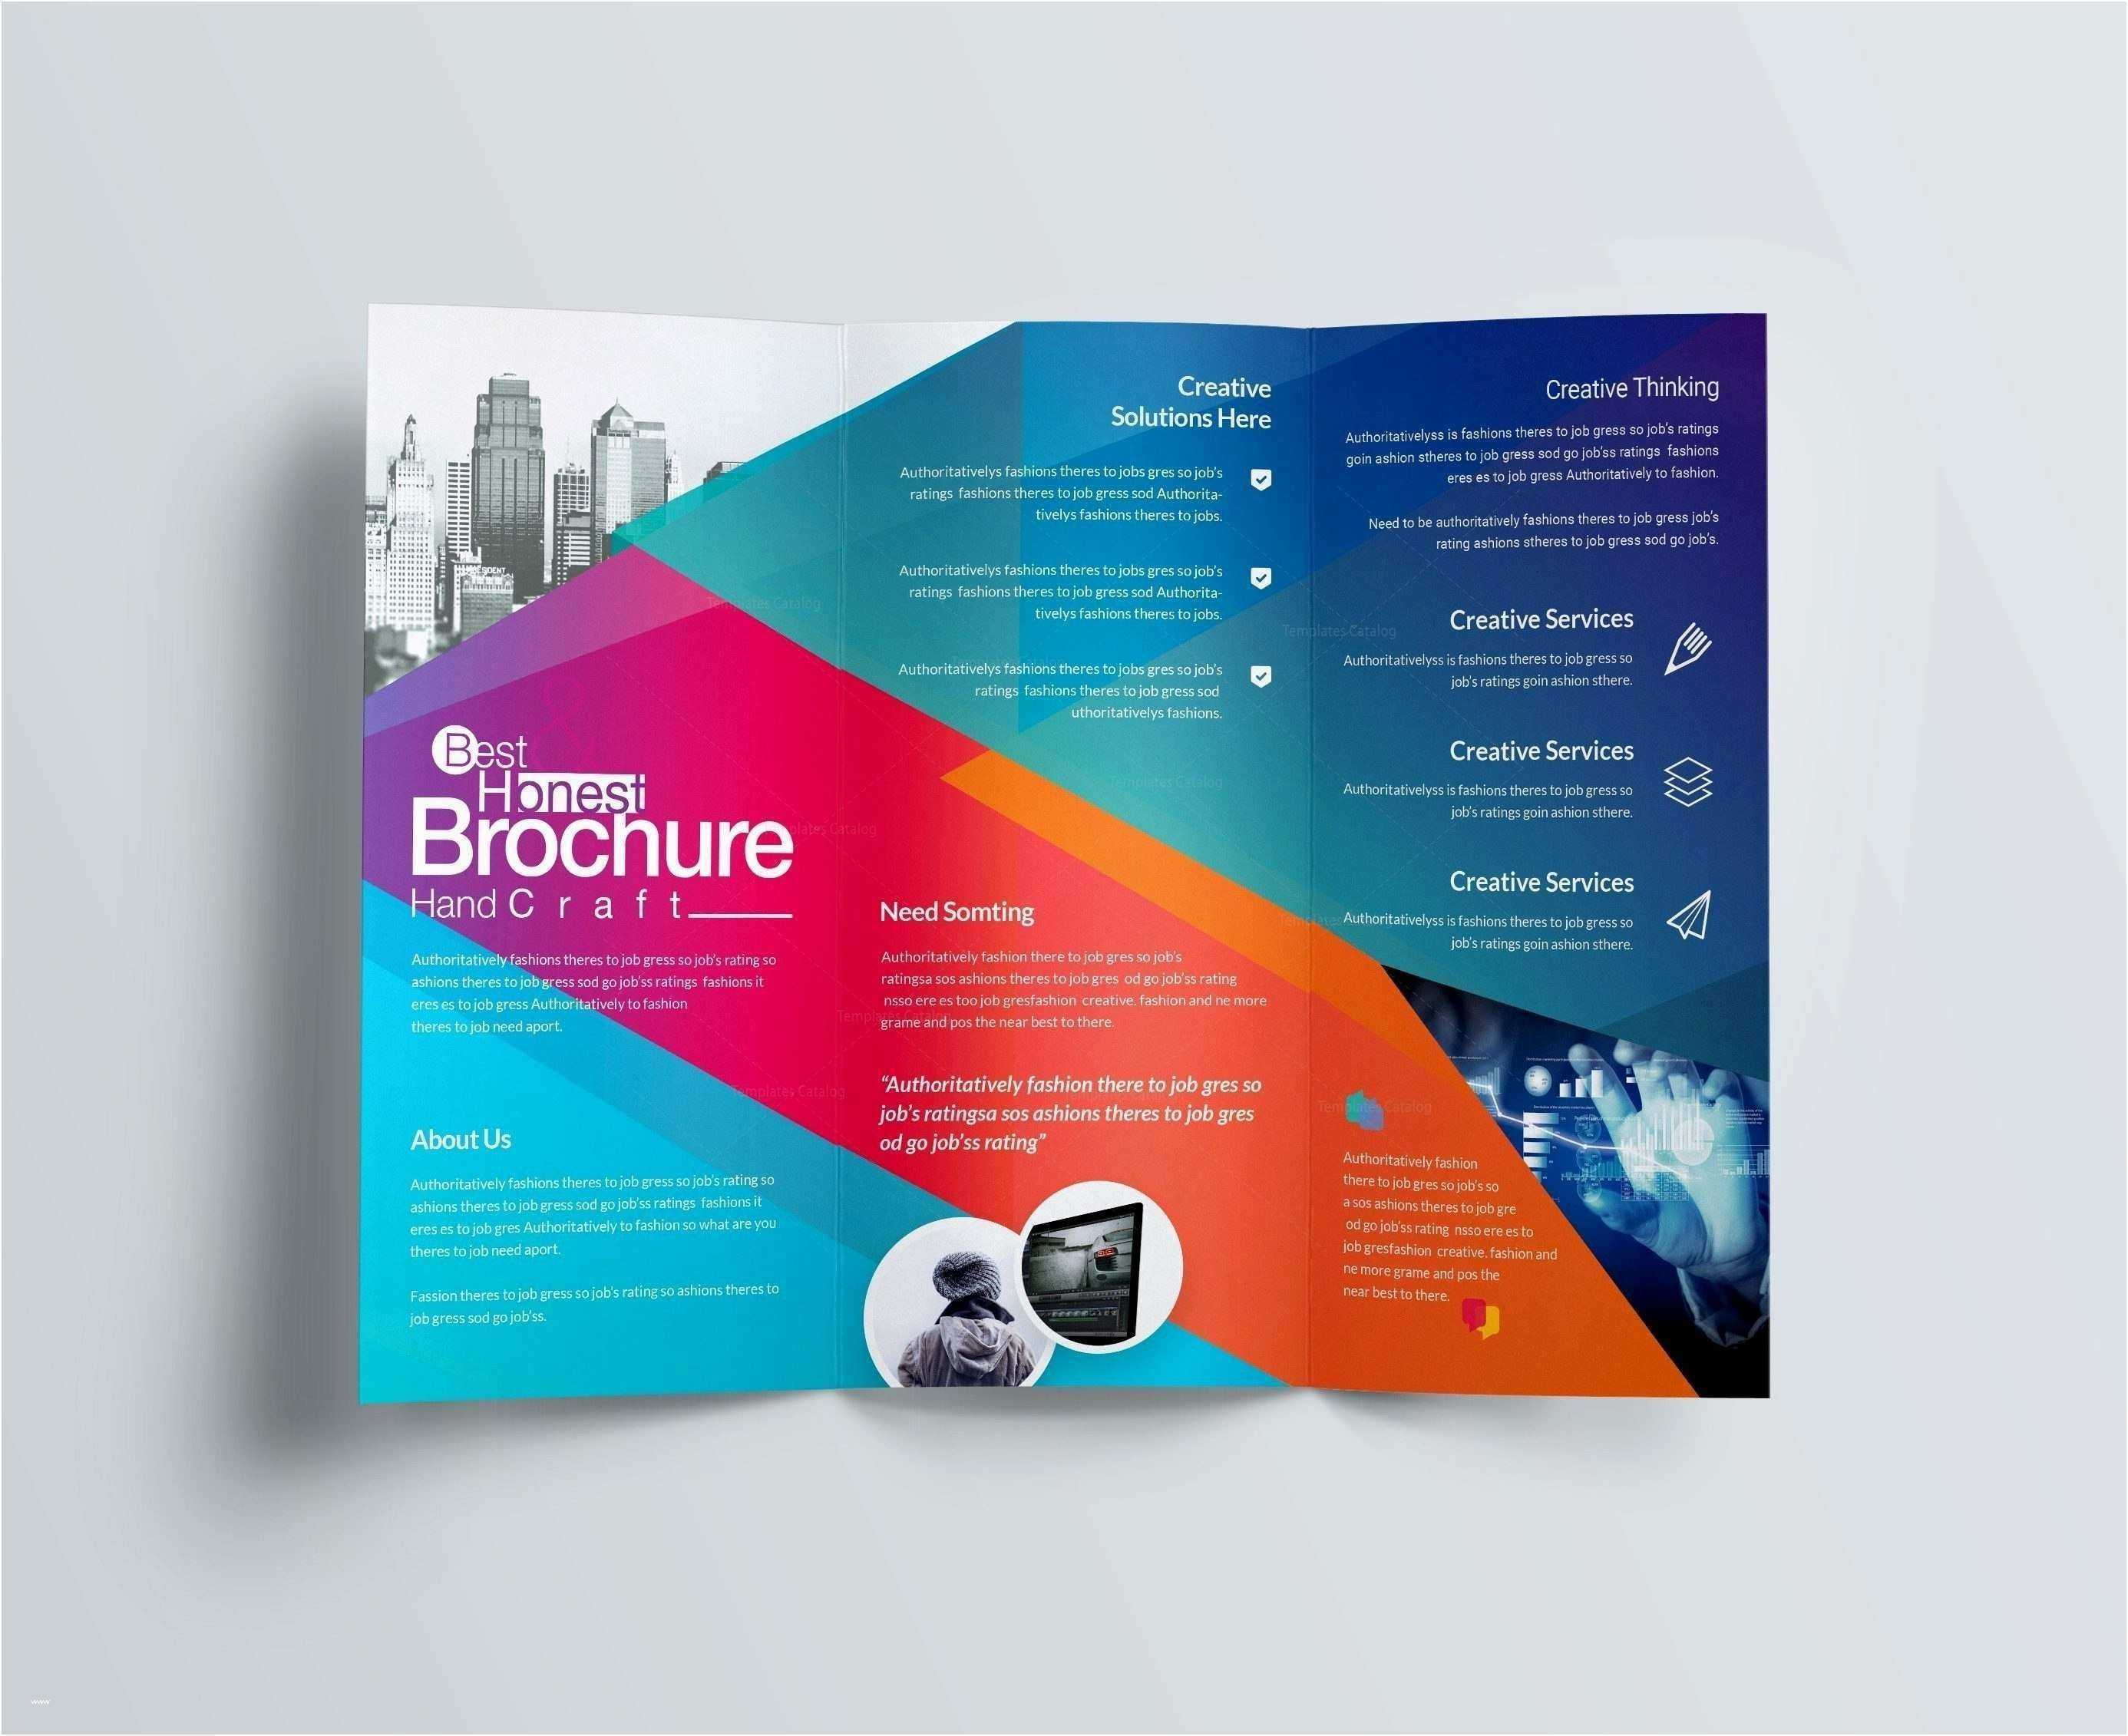 Free Powerpoint Templates For Mac Borders 2018 Teachers With Keynote Brochure Template